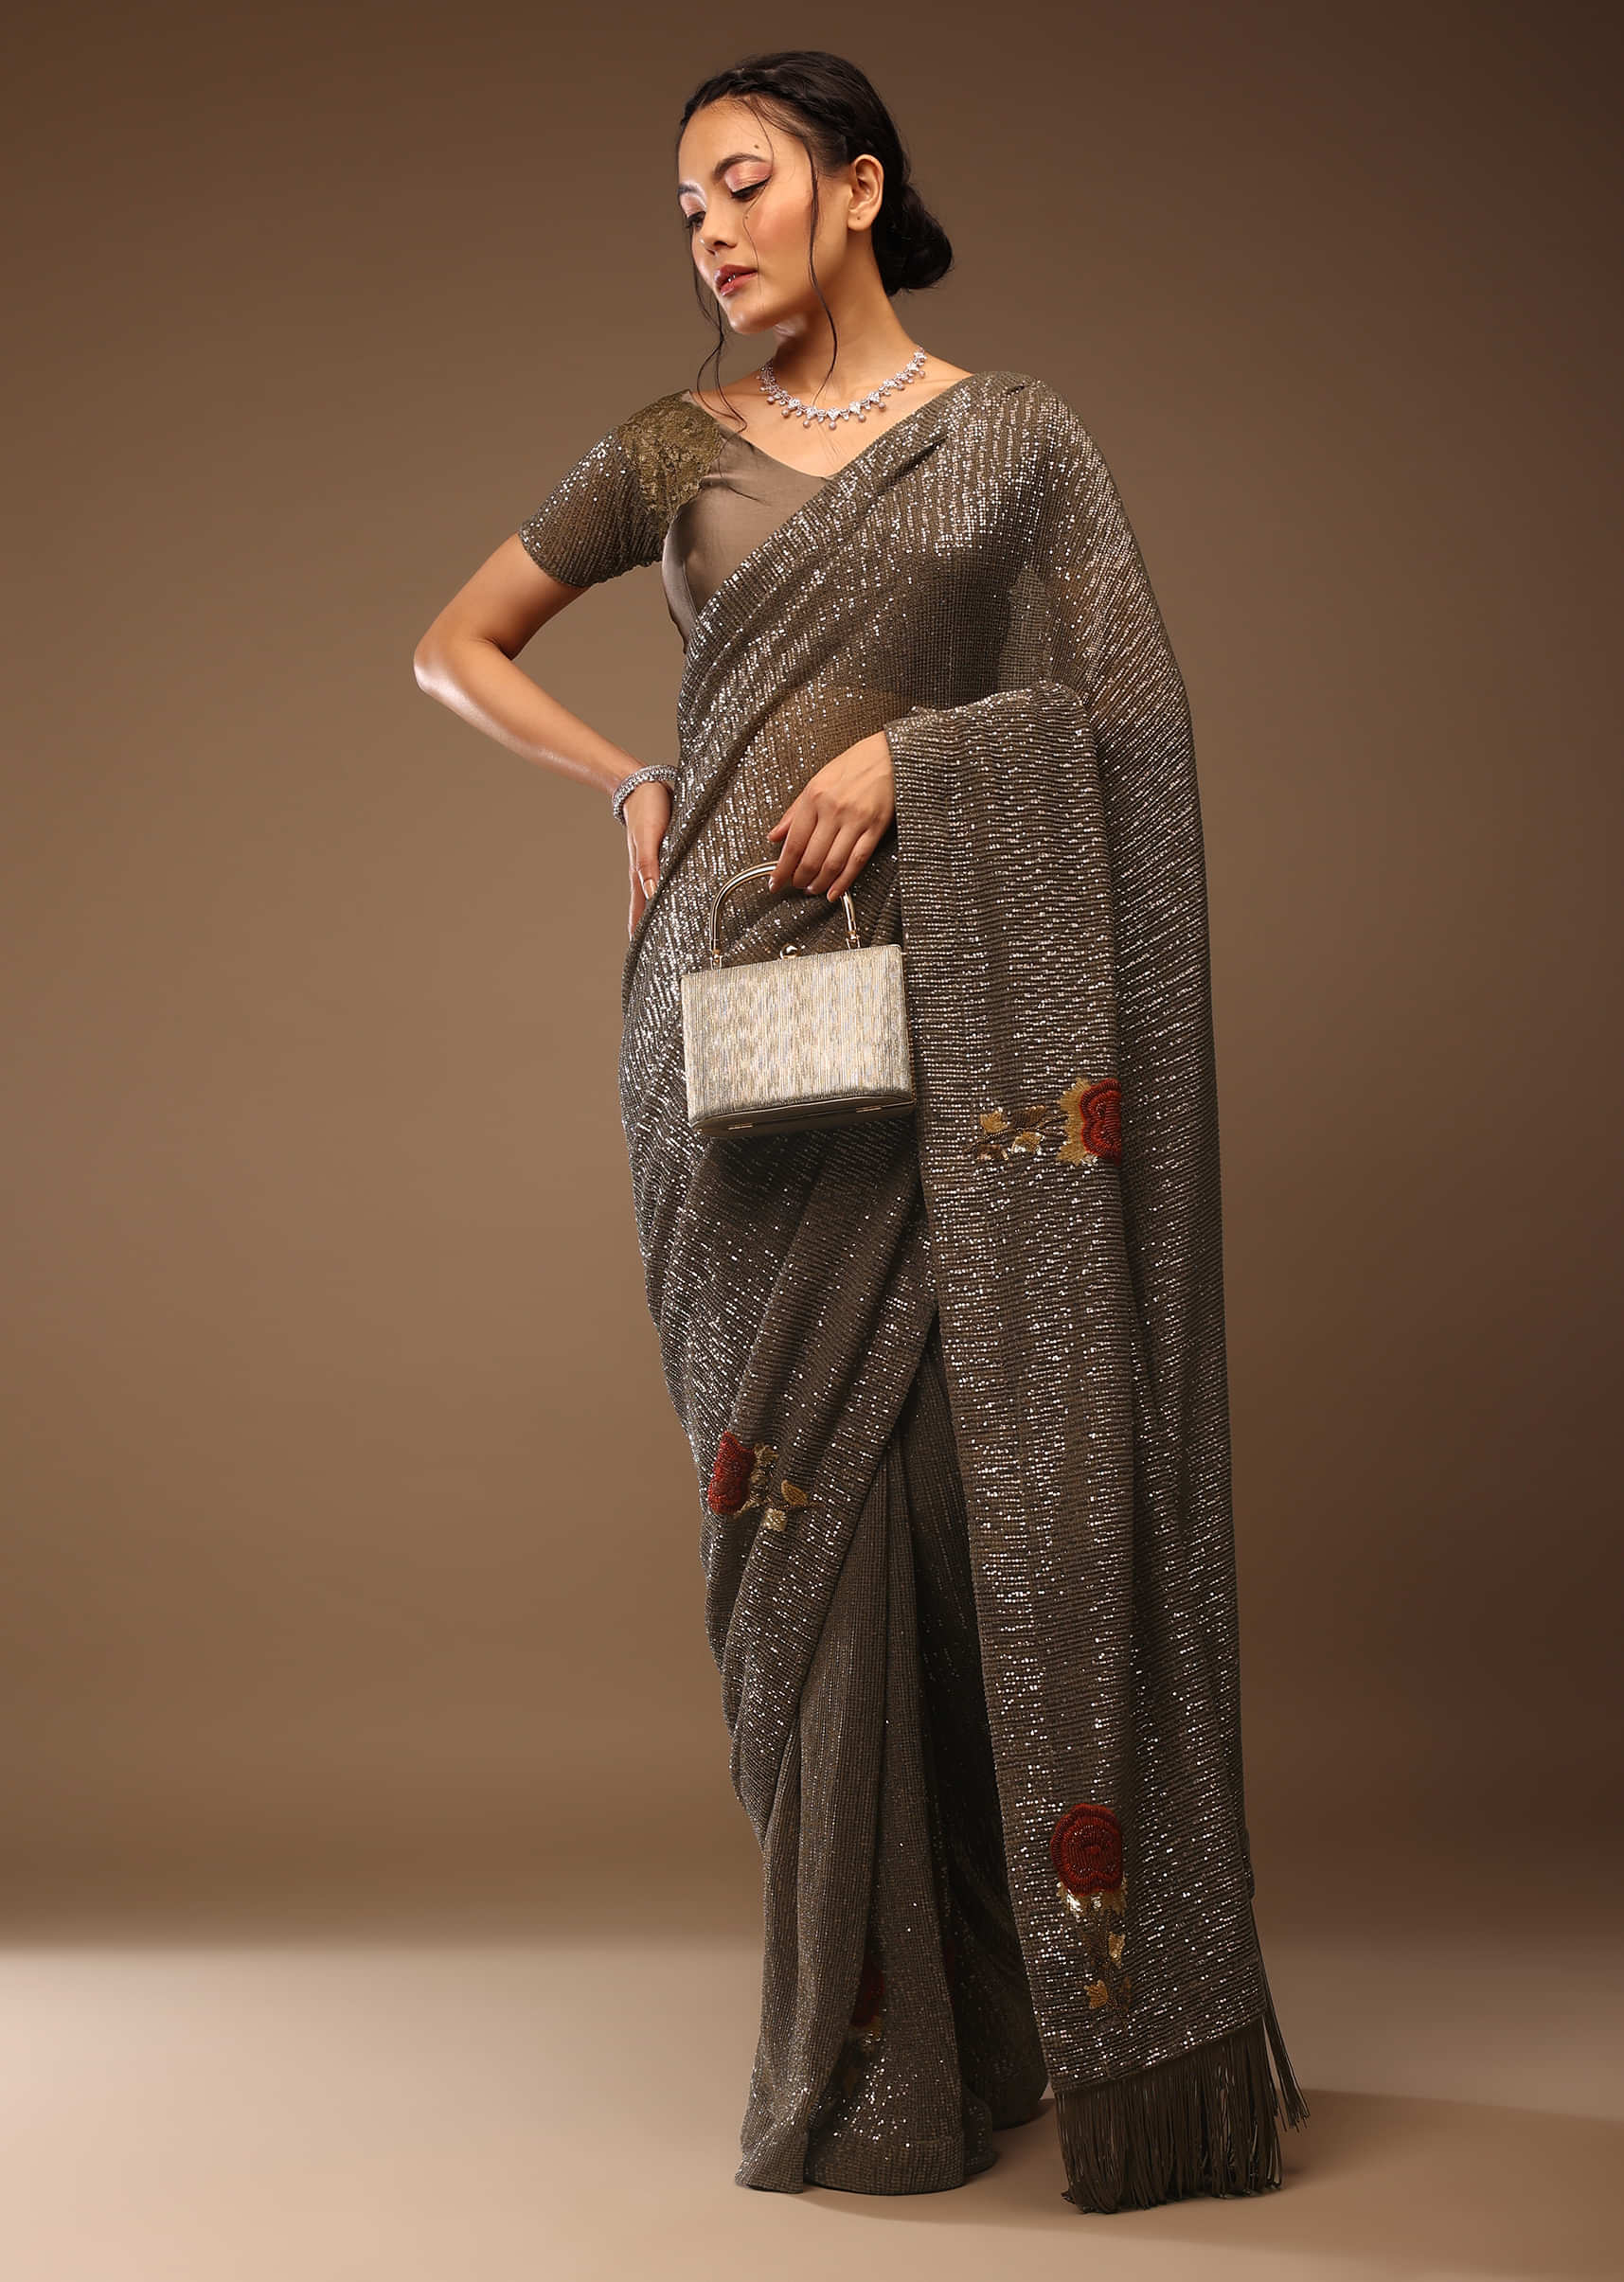 Deep Mahogany Brown Saree With Multi-Colored Sequins Floral Motifs Embroidery 